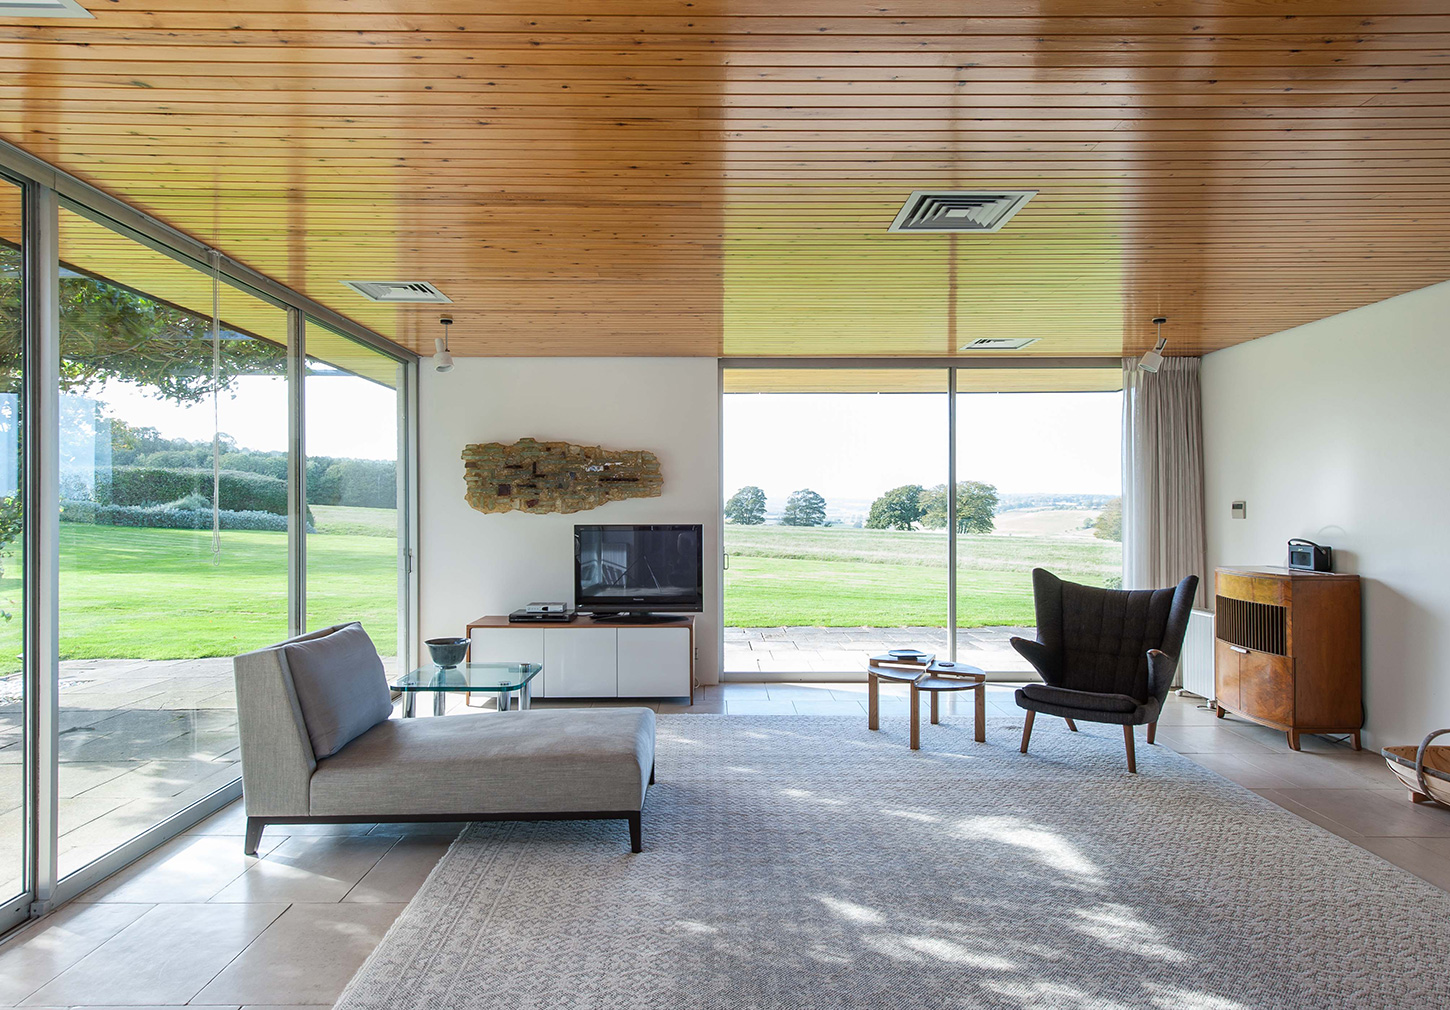 Mies-inspired midcentury home is for sale in the UK's Rye